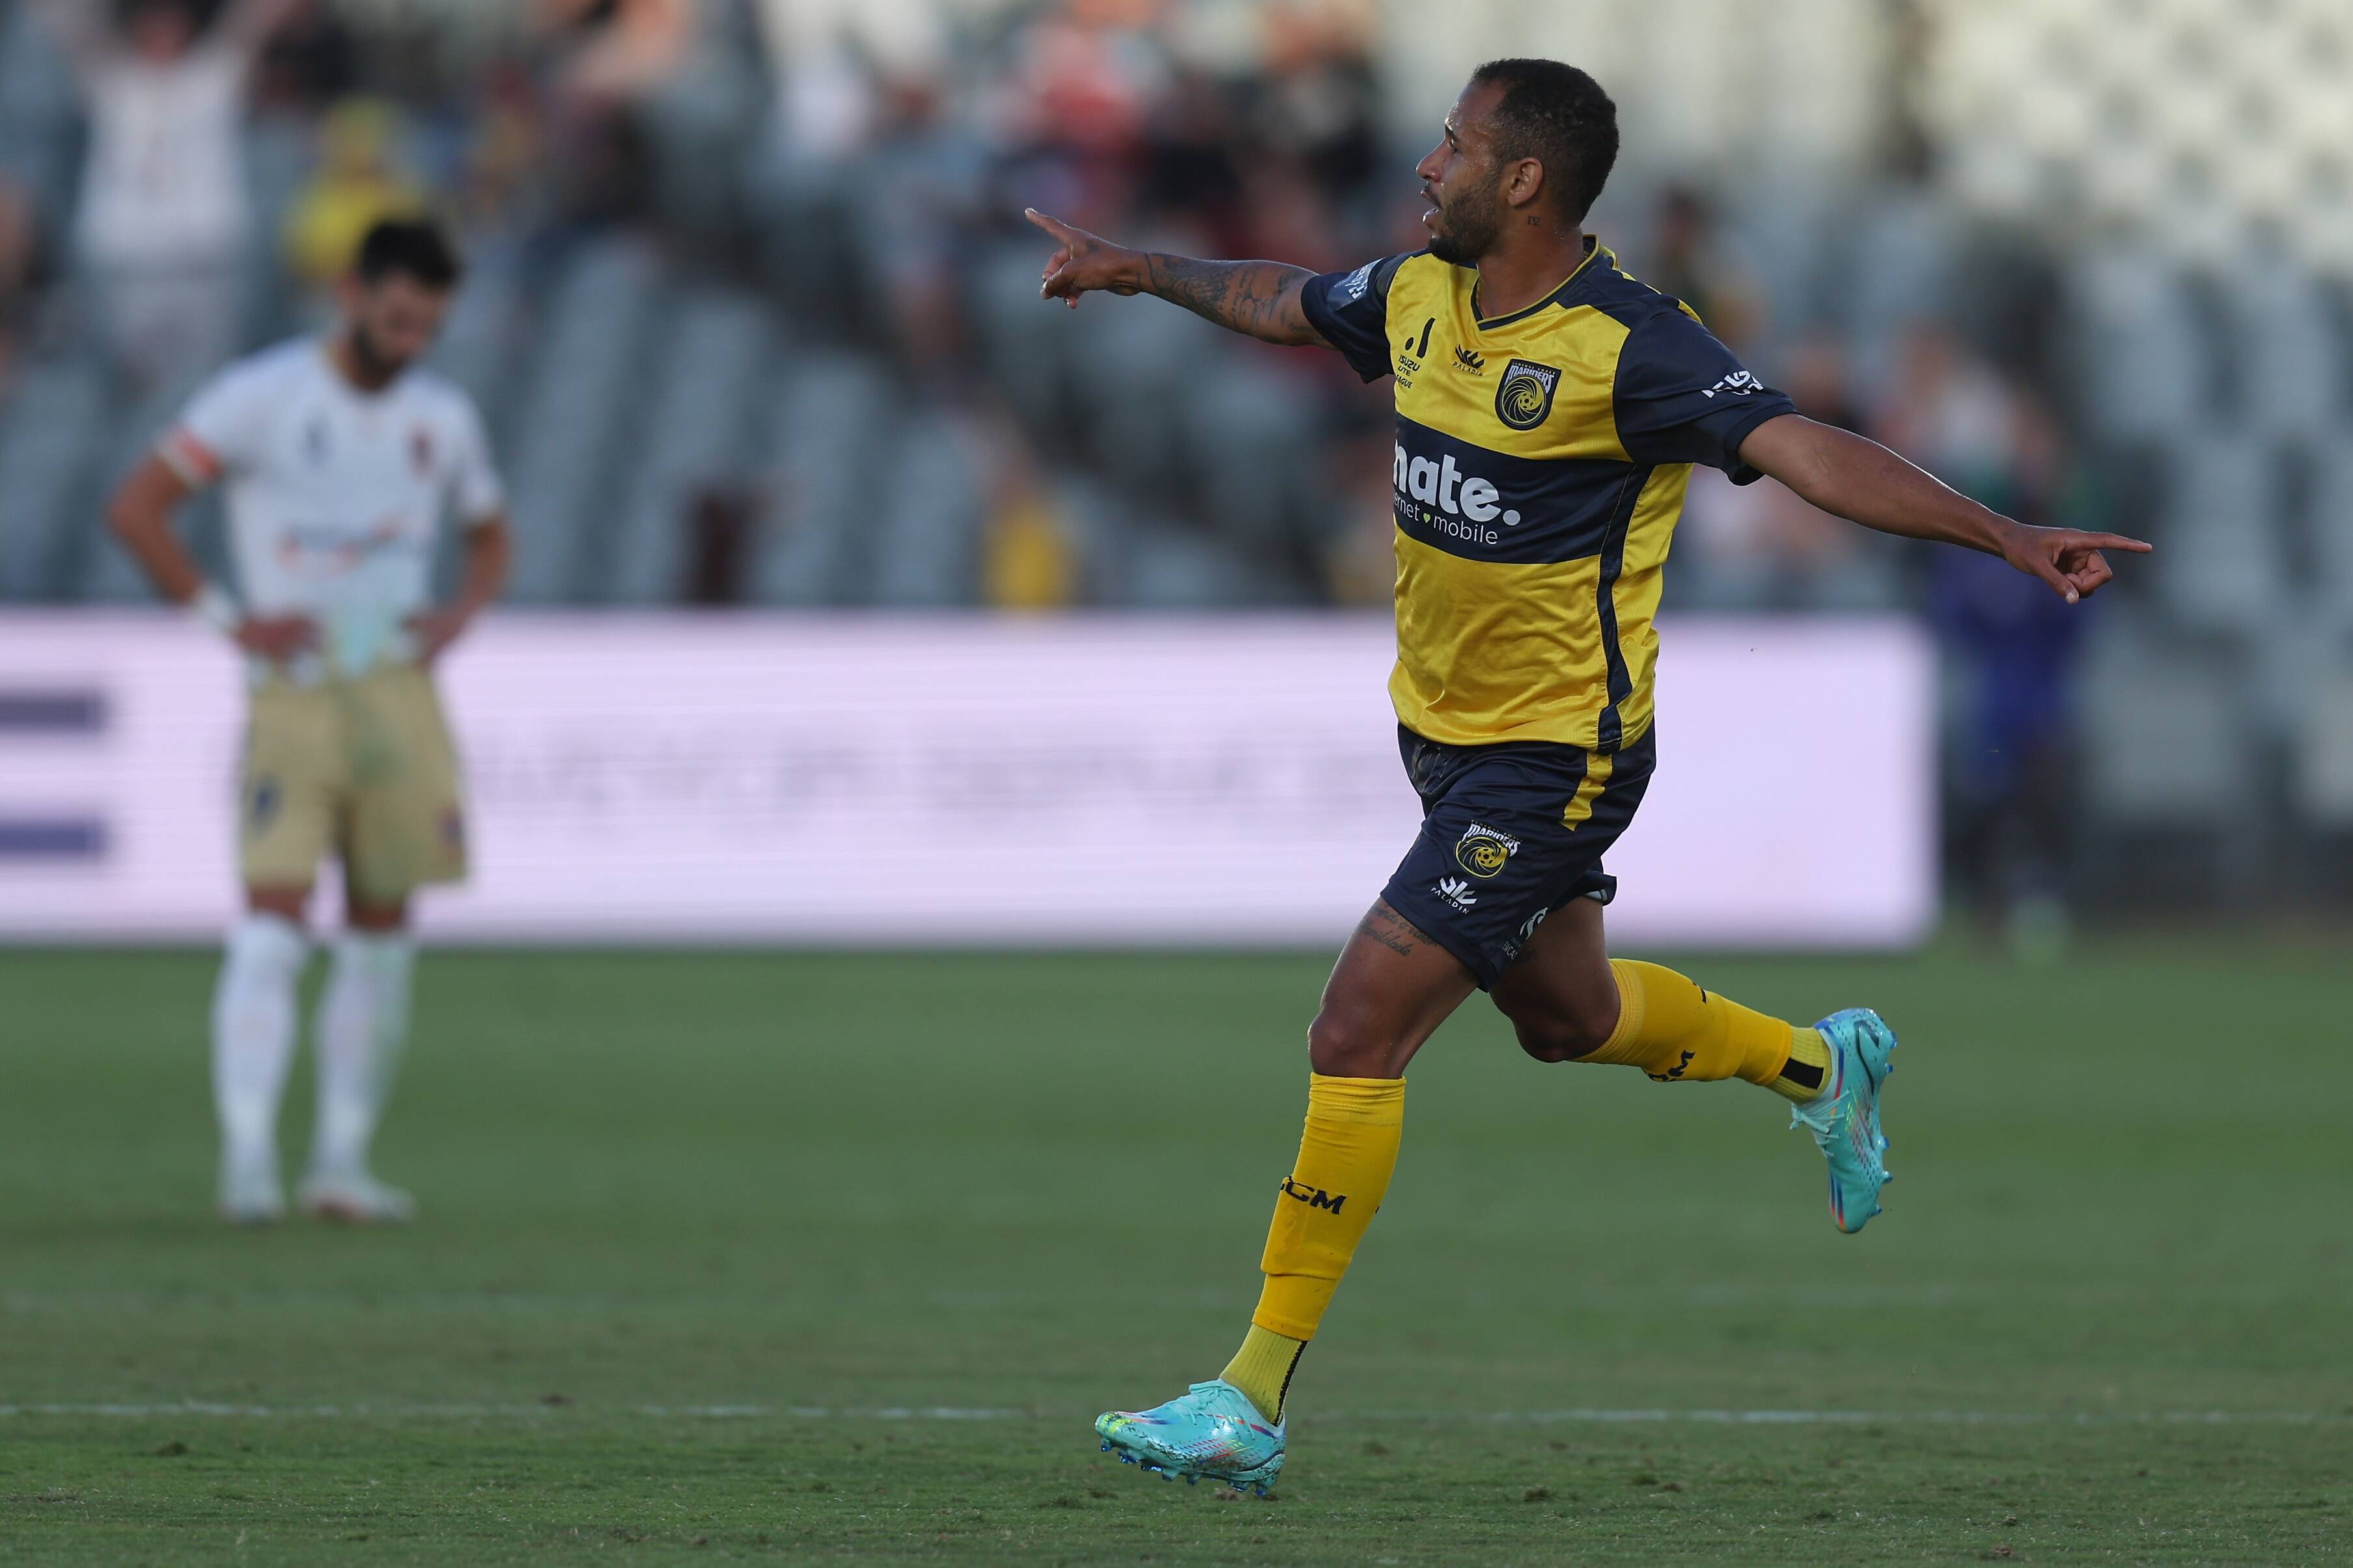 A-League 2022: Marco Tulio scores 40 metre chip for Central Coast Mariners  against Newcastle Jets